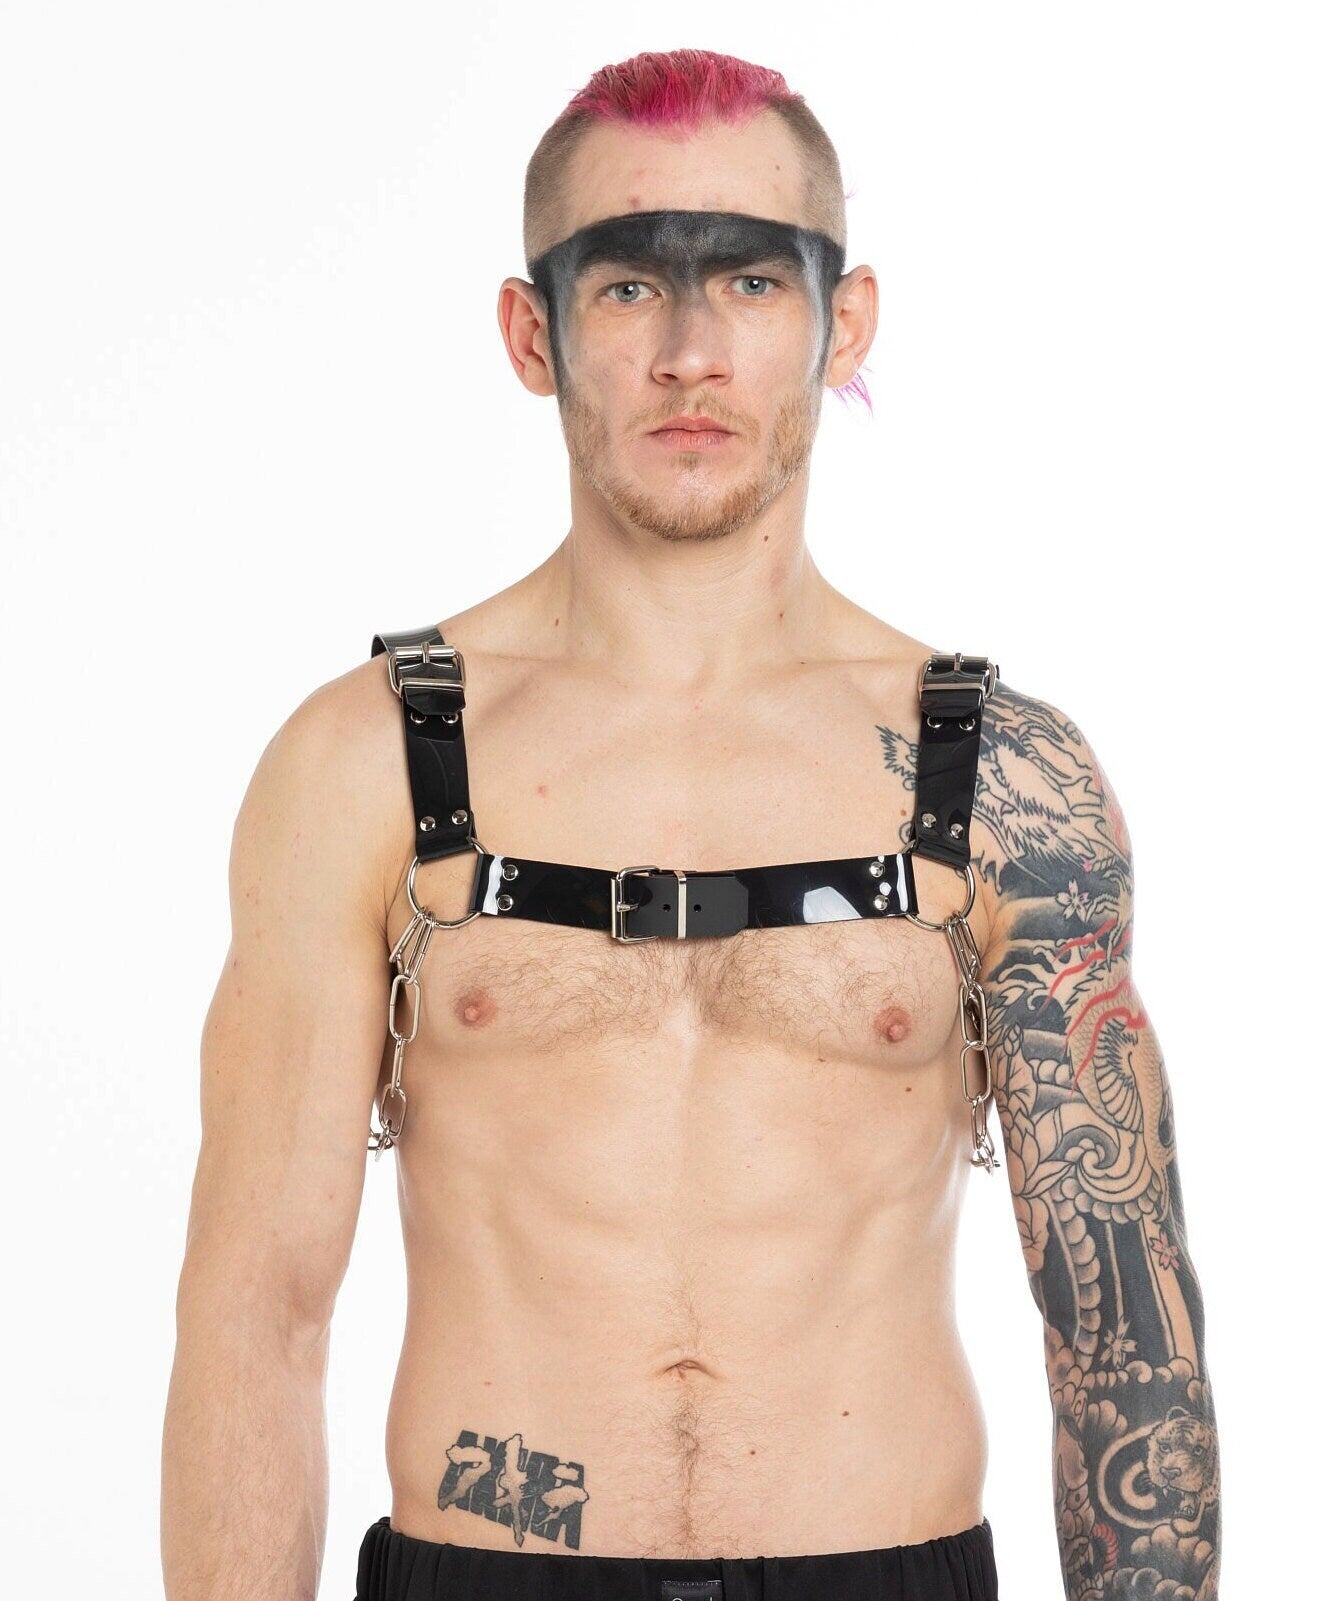 Tattooed Berlin raver with a PVC chest harness